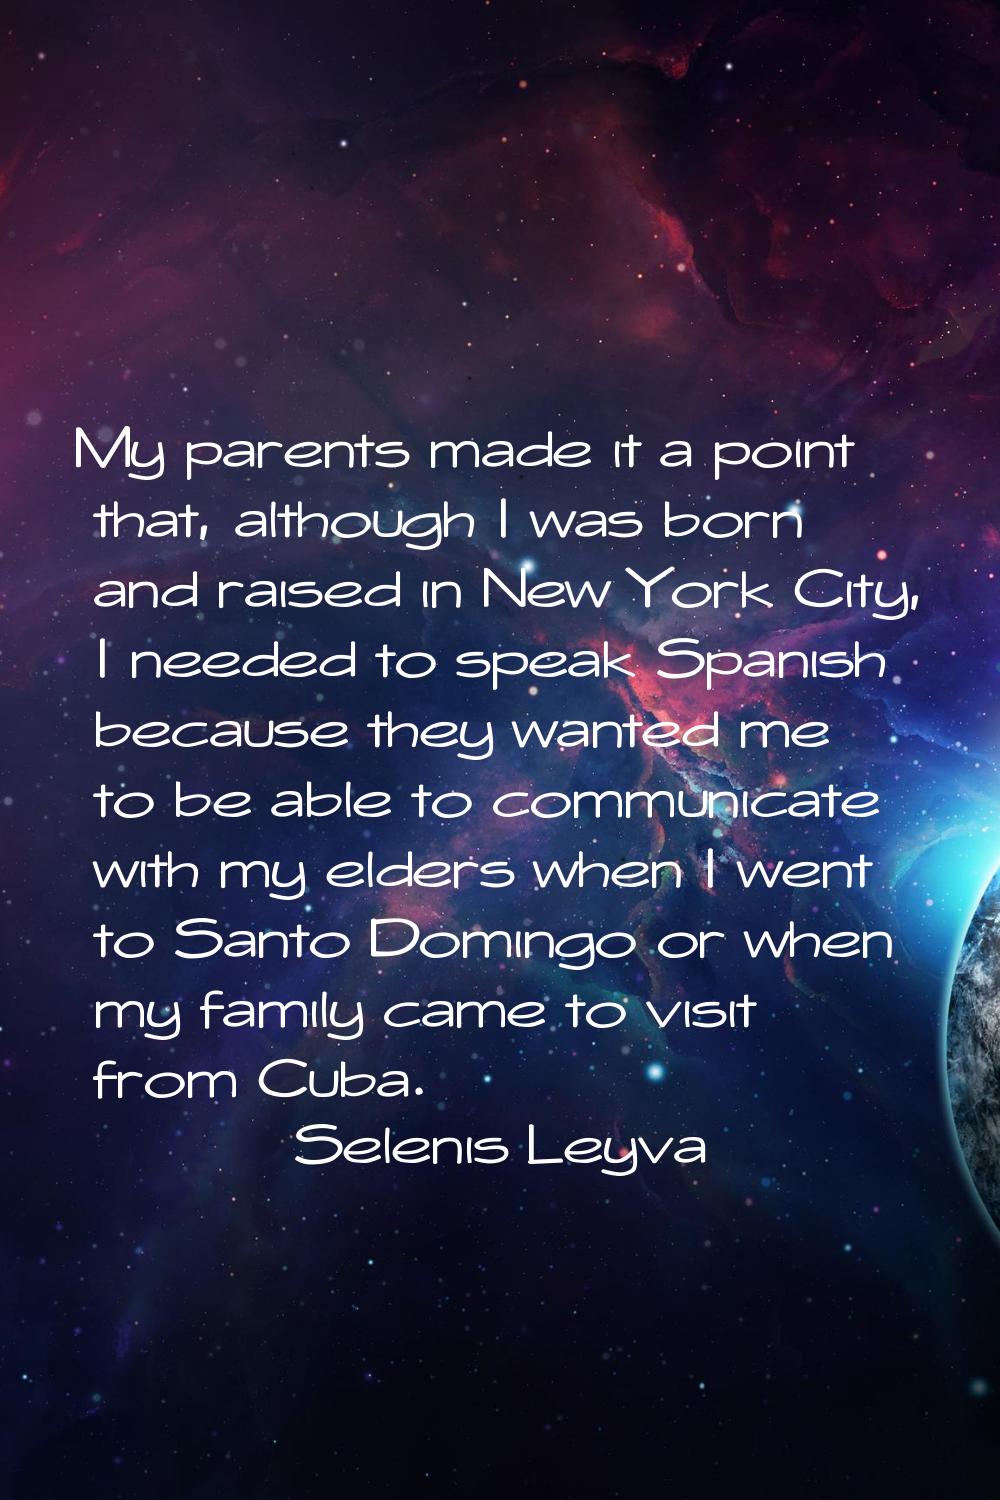 My parents made it a point that, although I was born and raised in New York City, I needed to speak